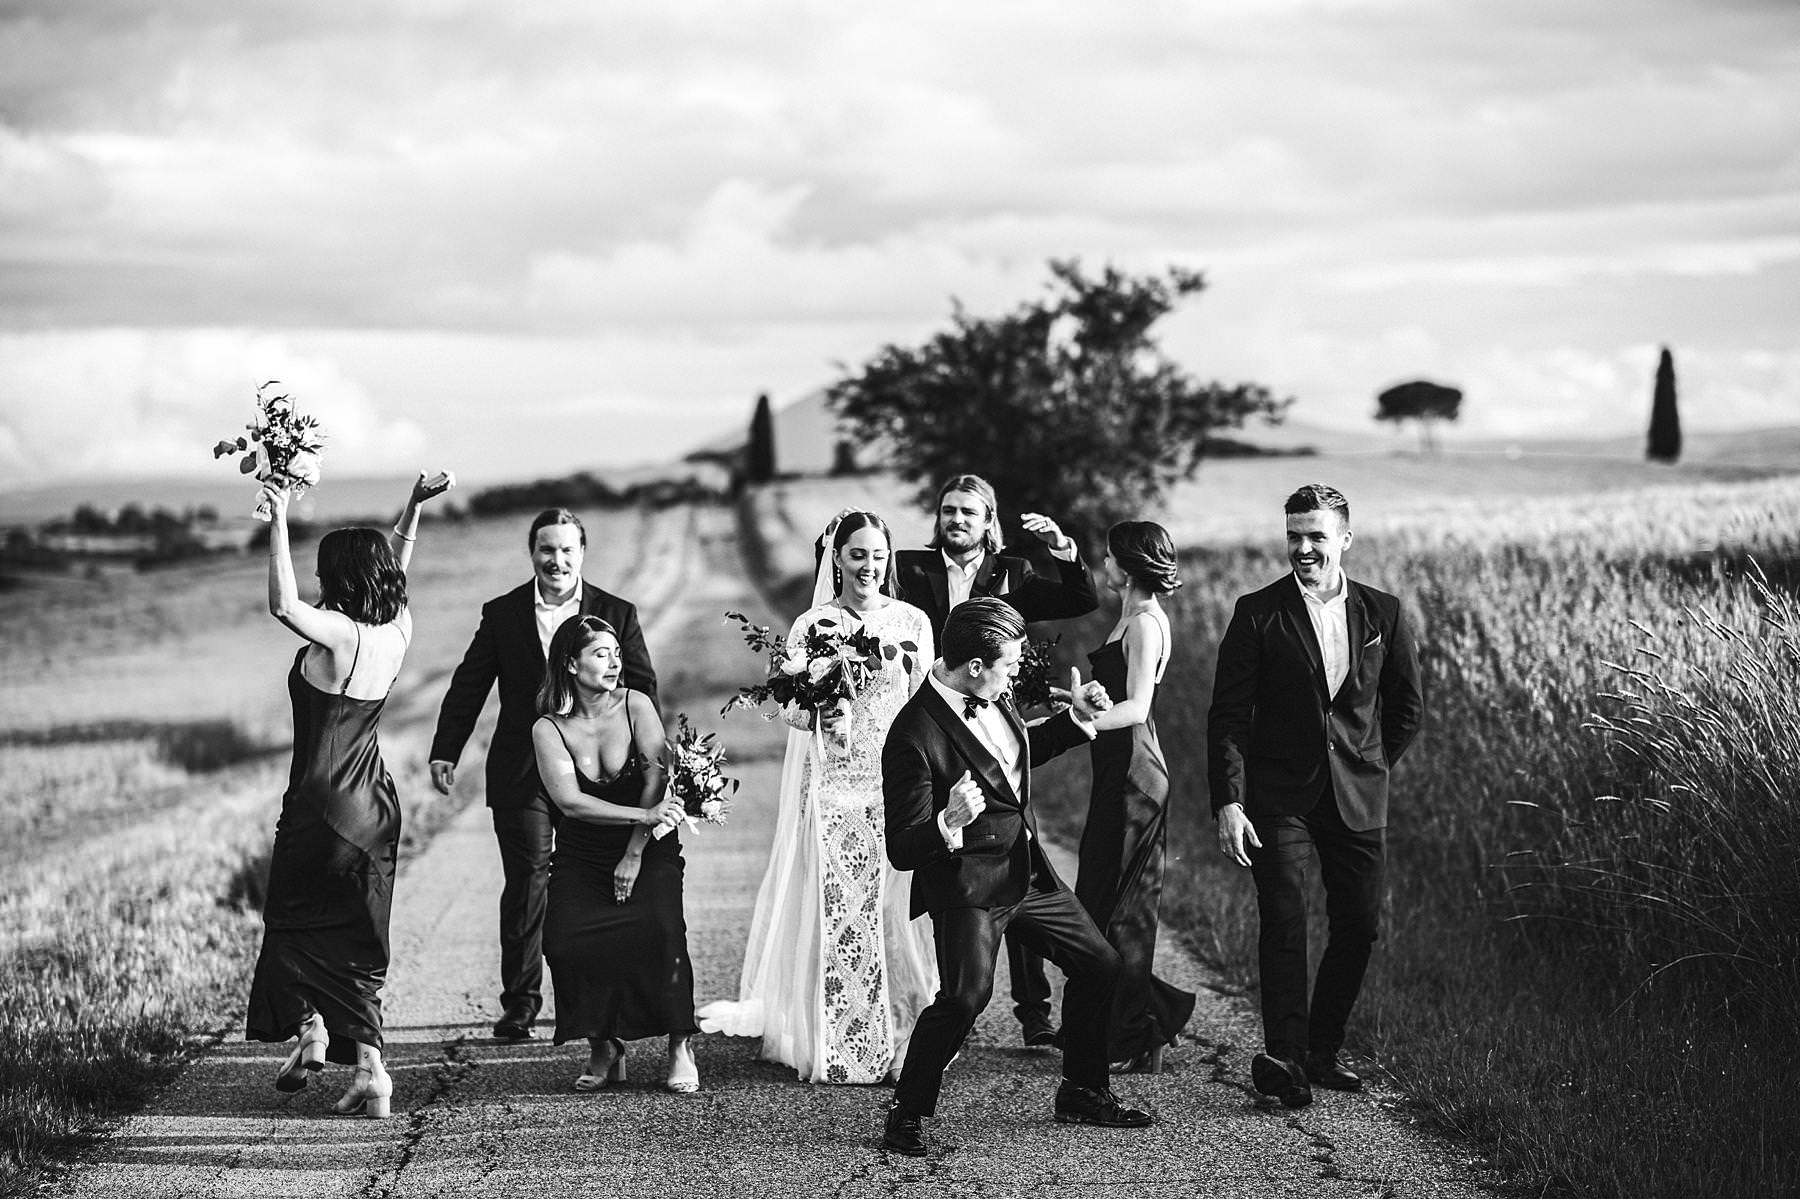 Unforgettable destination wedding in Umbria at Villa l’Antica Posta, elegance and fun in a nutshell. Amazing bridal party wedding photo in the countryside of Umbria with corn field as the background